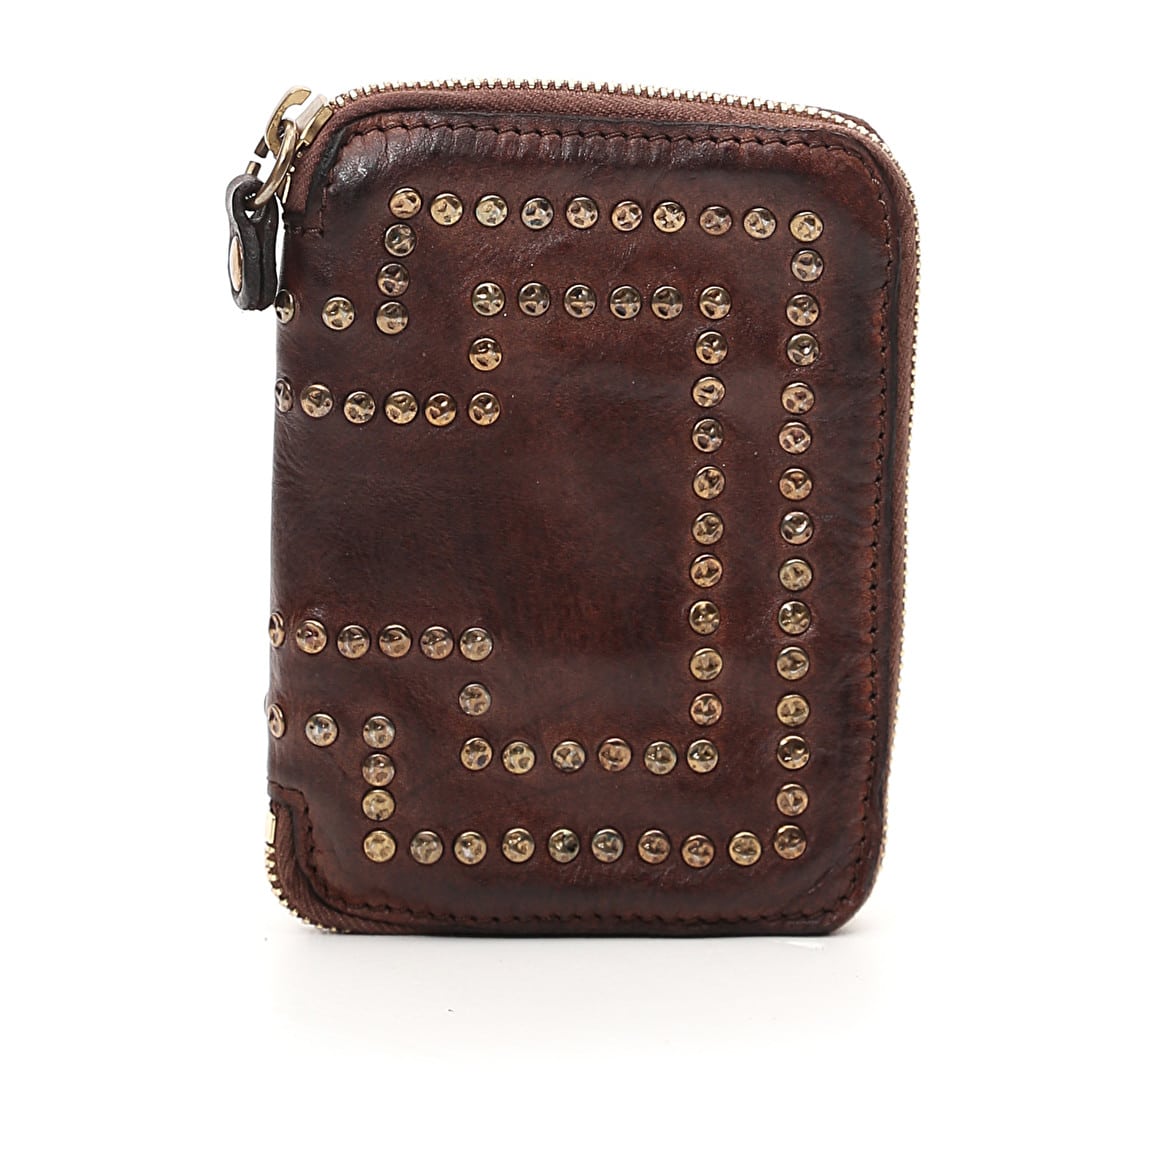 Campomaggi leather wallet with rivets